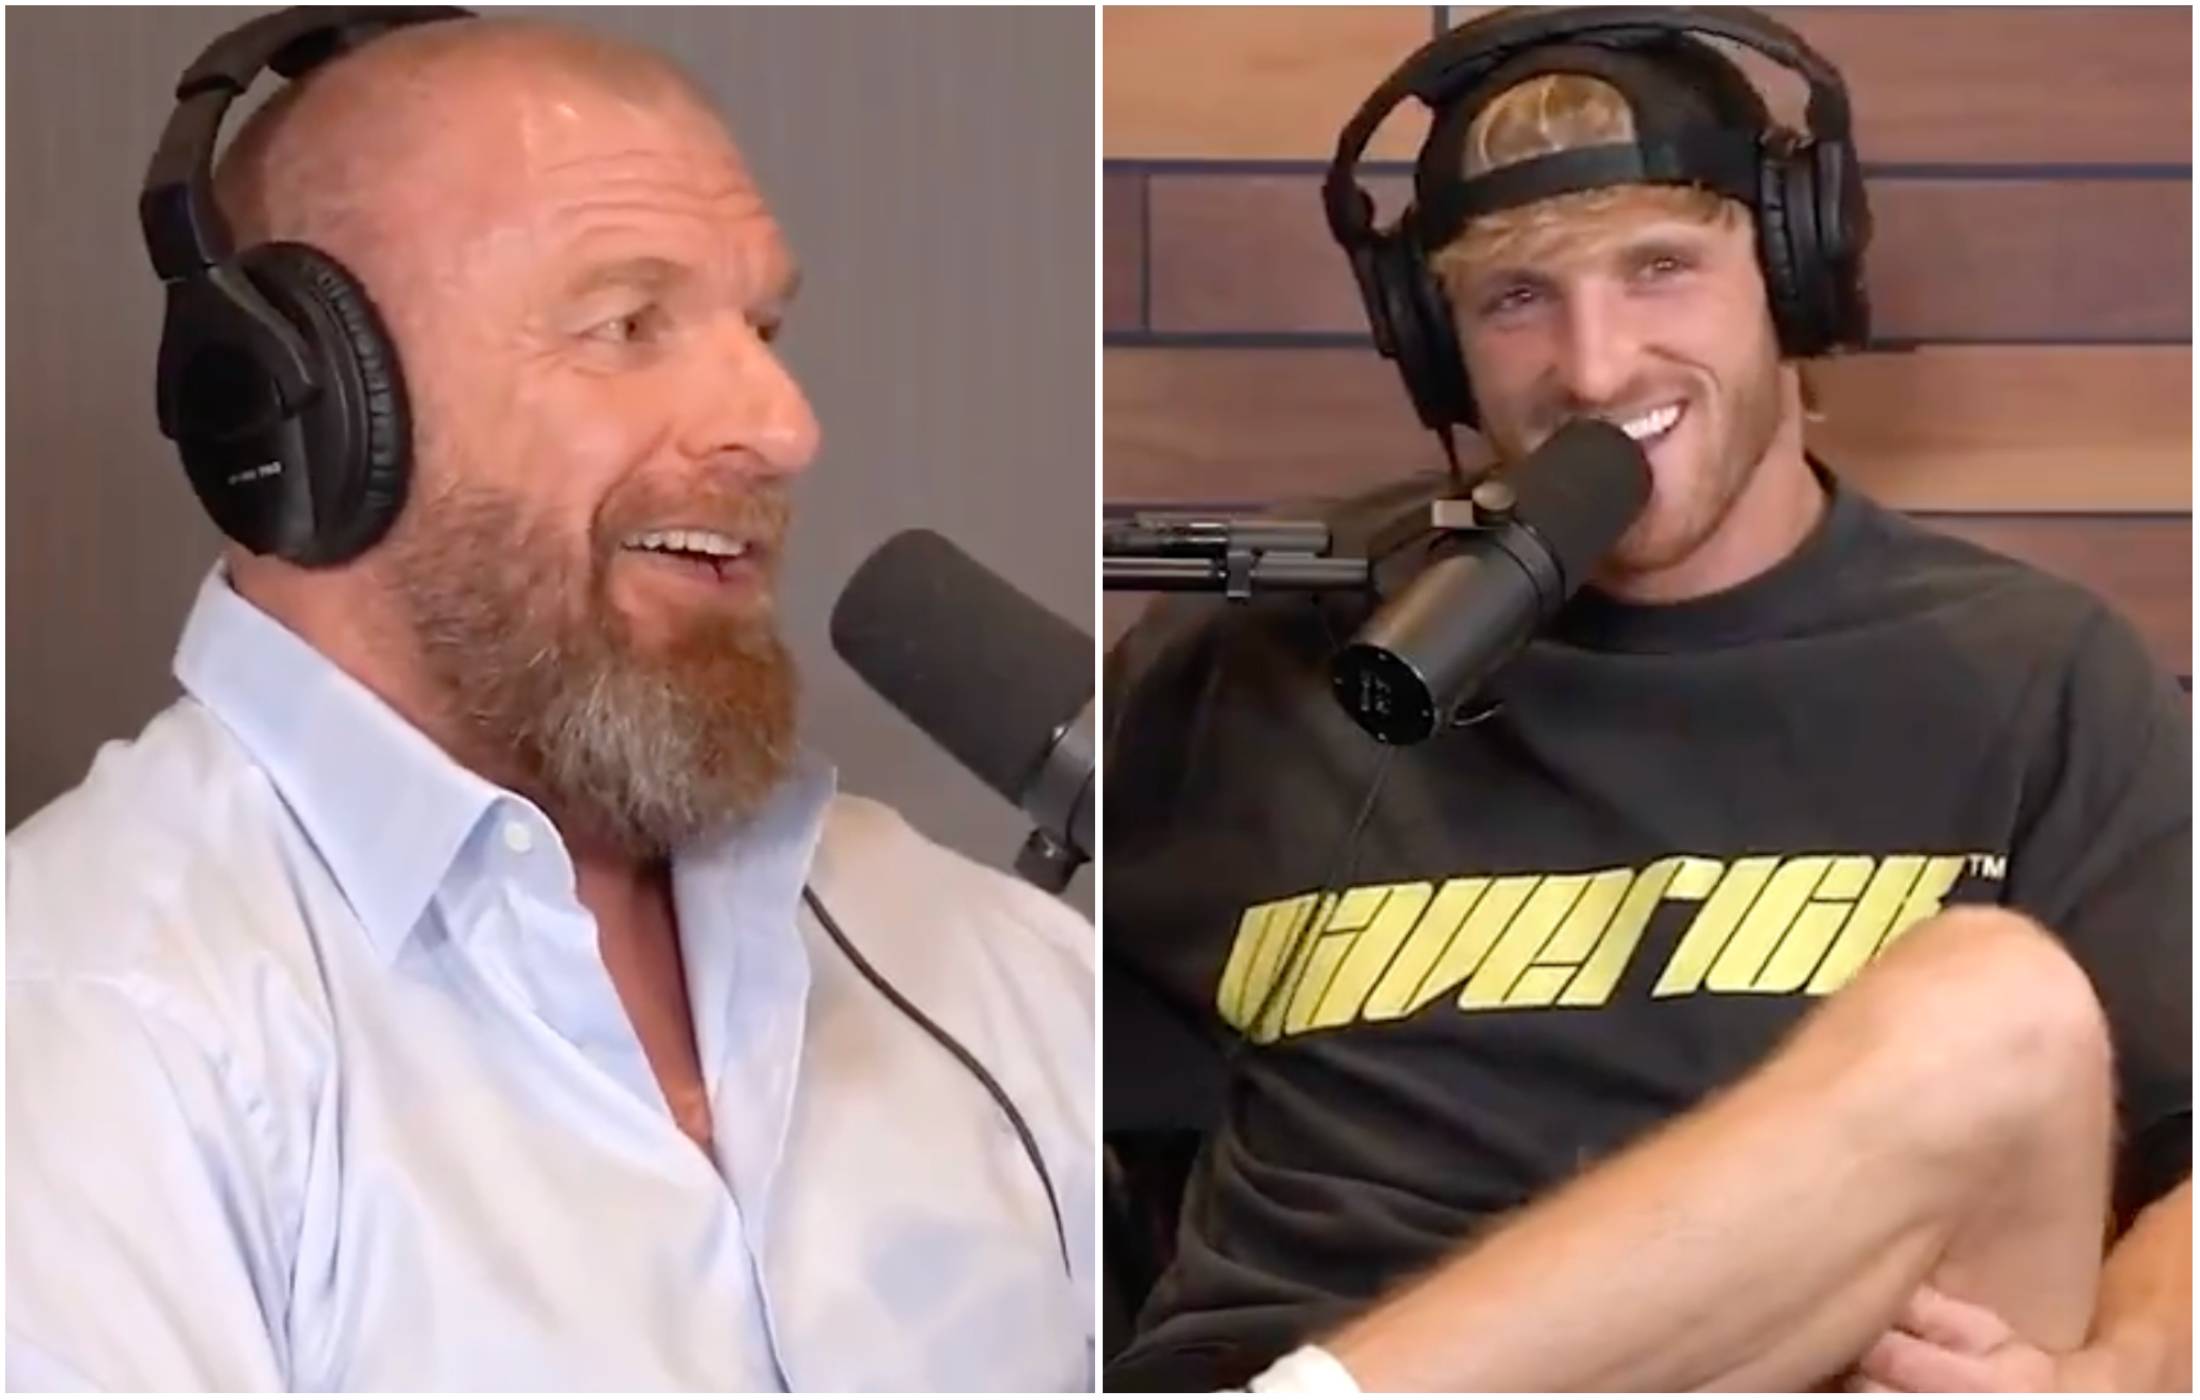 Logan Paul is working for Triple H in WWE right now